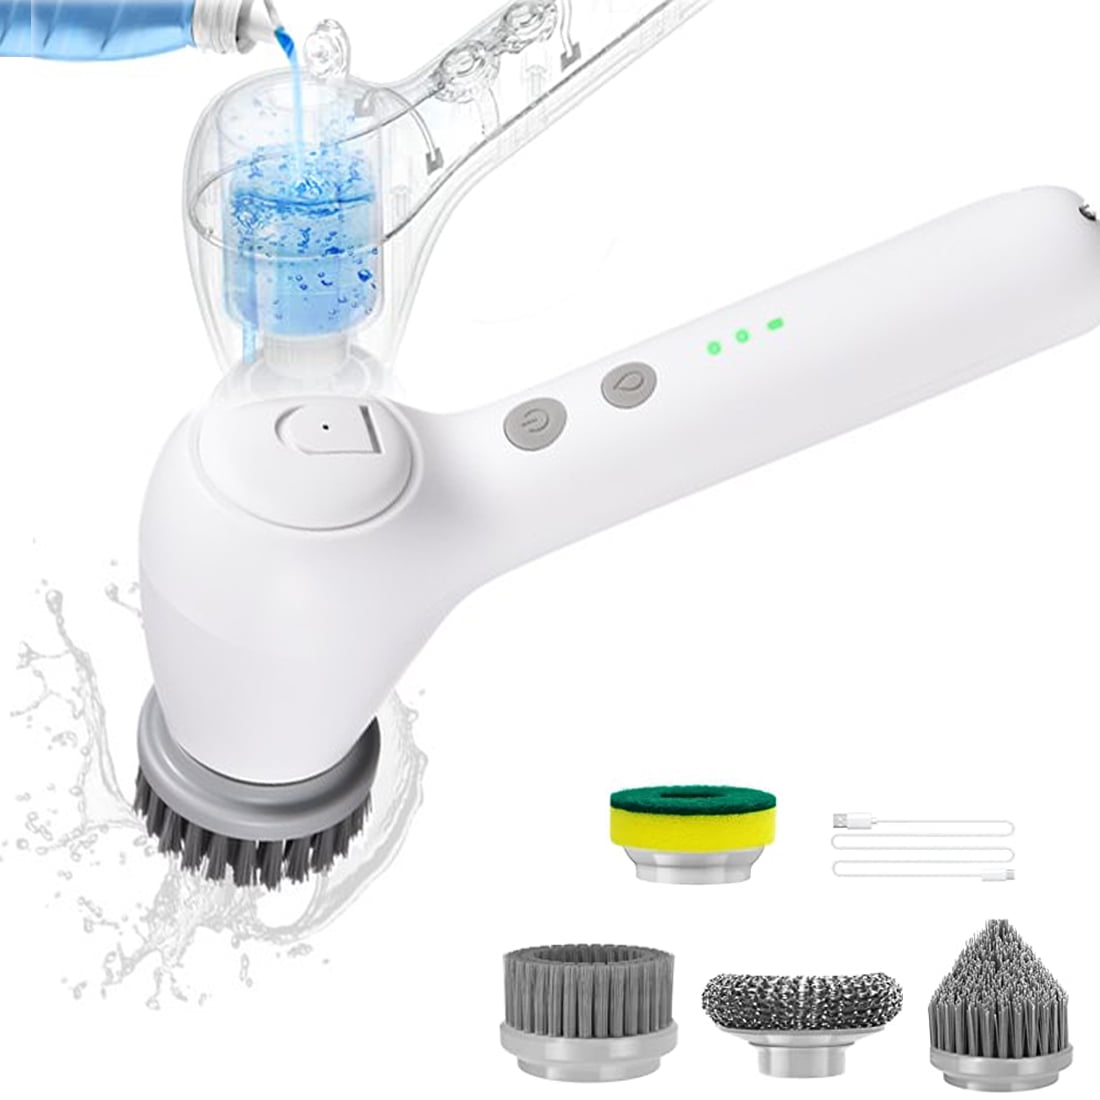 Electric Spin Cleaning Brushes with 5 PCS Heads Cordless Portable